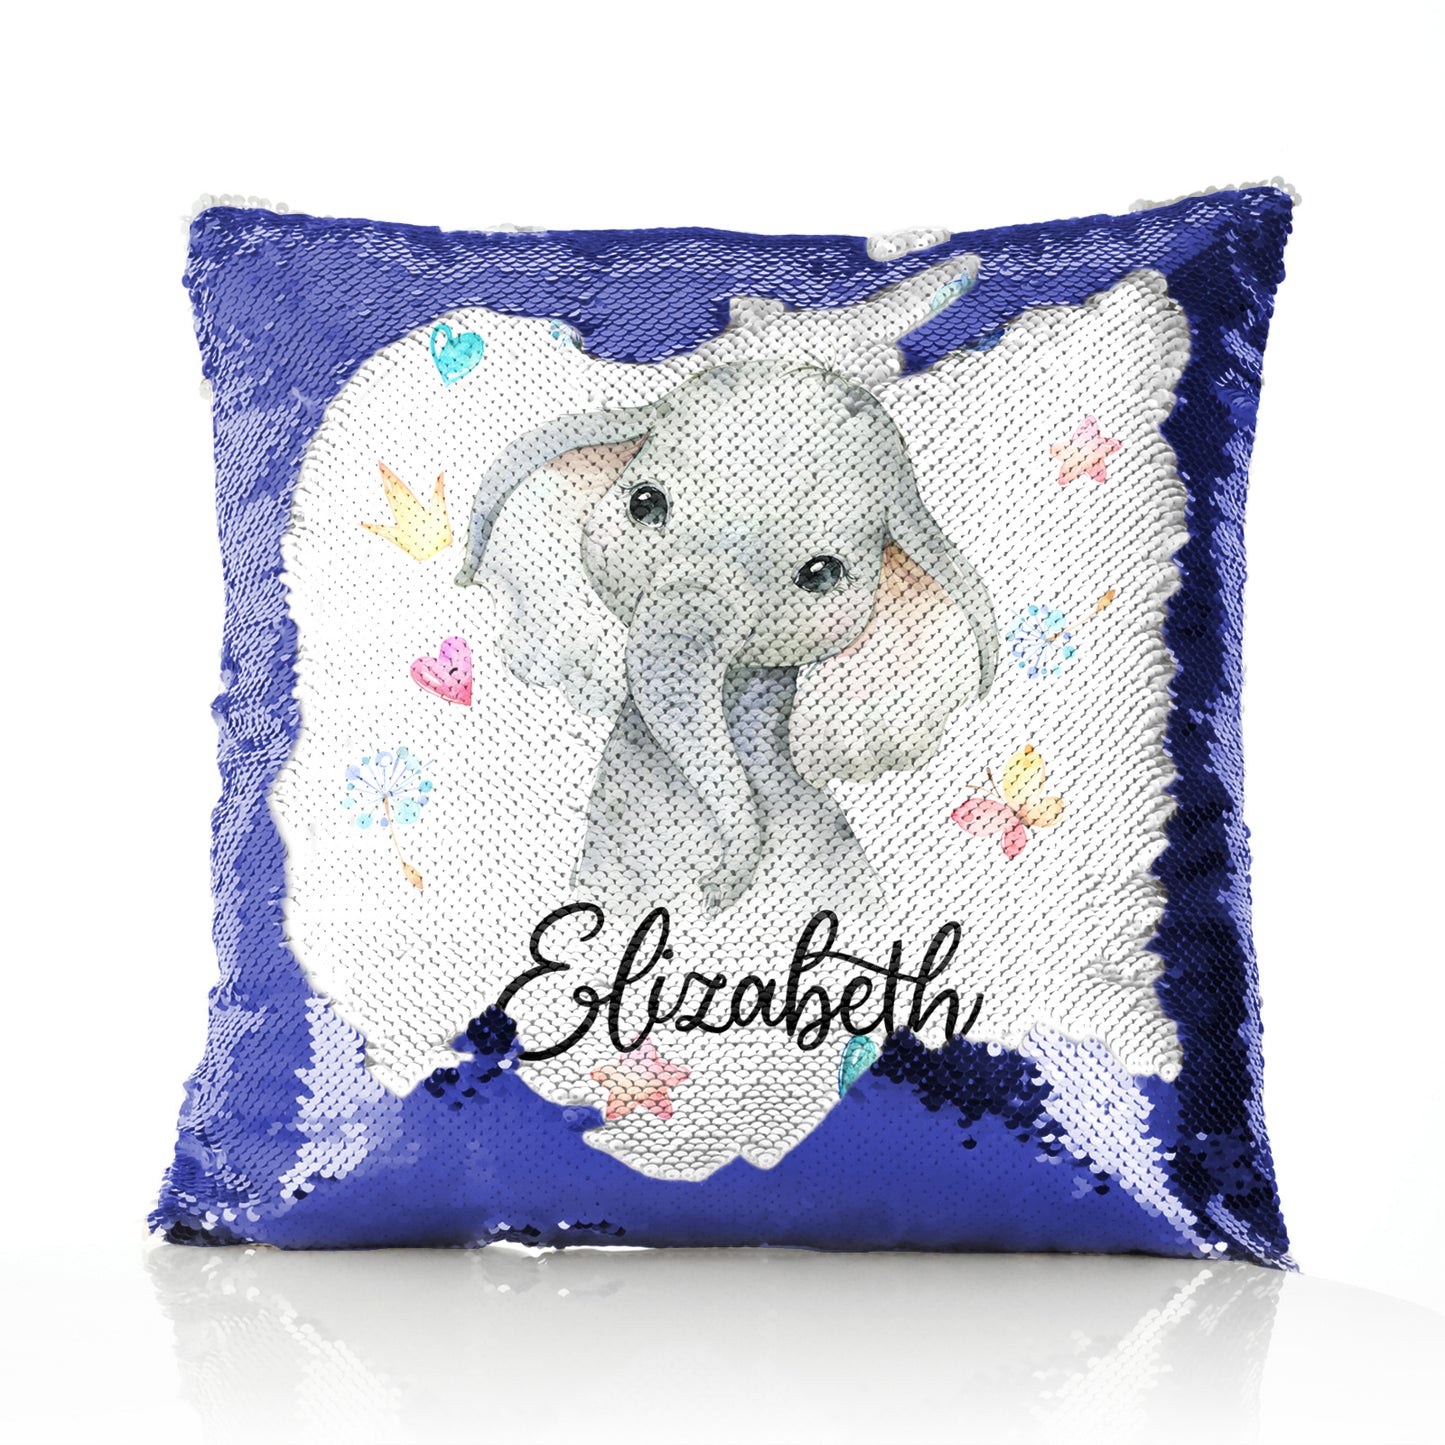 Personalised Sequin Cushion with Grey Elephant with Hearts Stars Crowns Butterfly and Cute Text